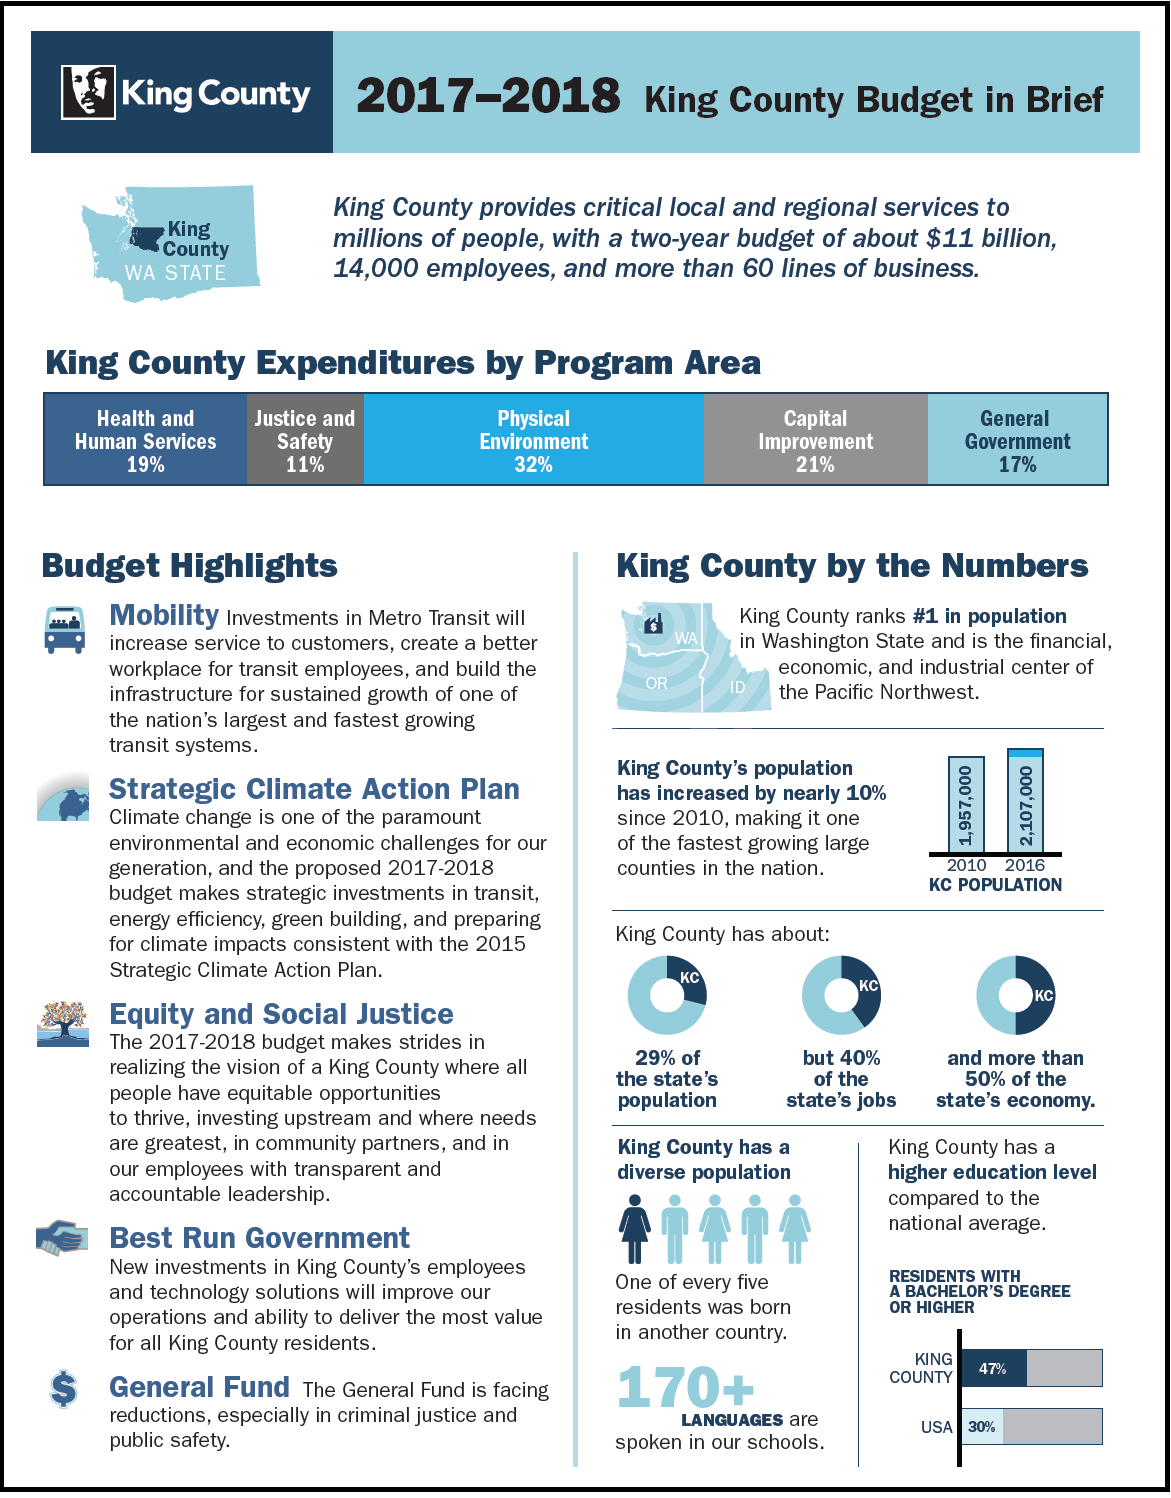 King County Budget in Brief 2017-2018